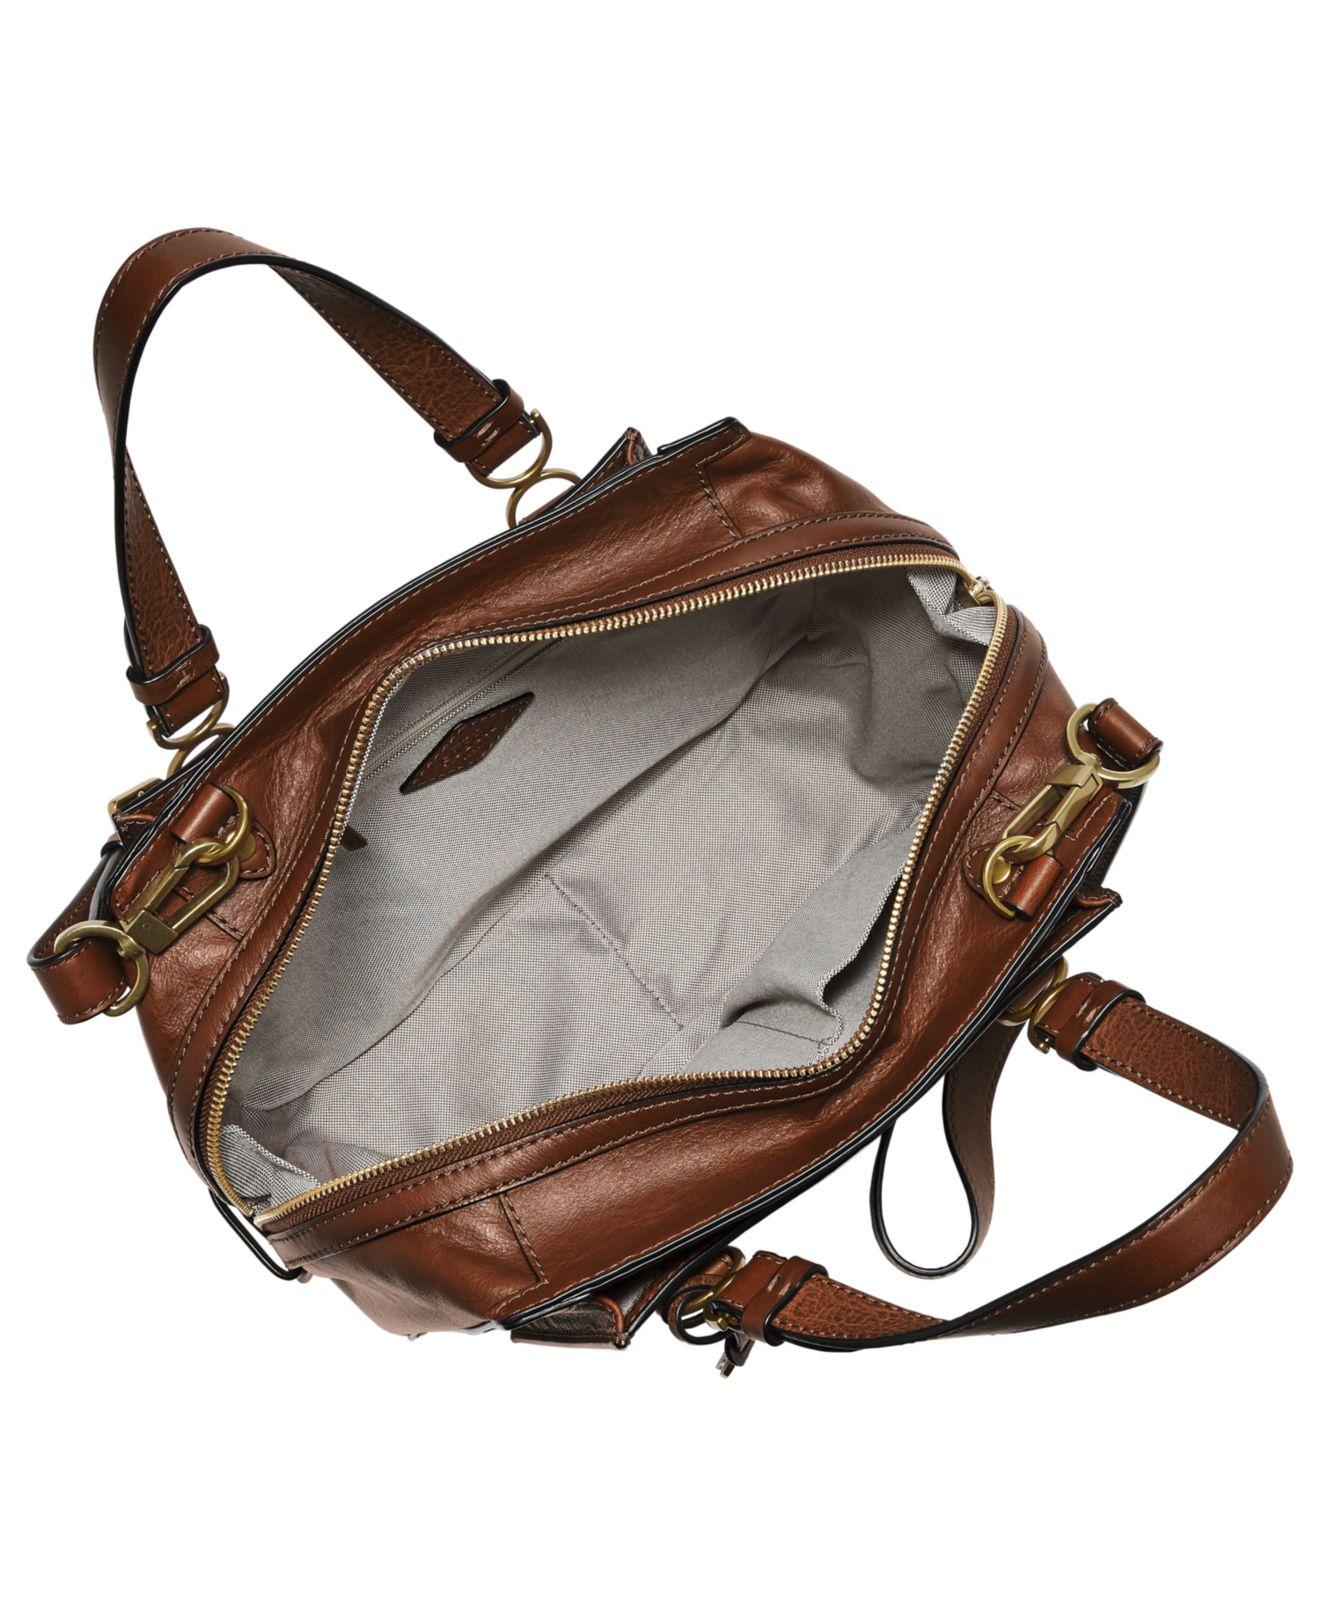 Fossil Brooke Leather Satchel in Brown - Lyst